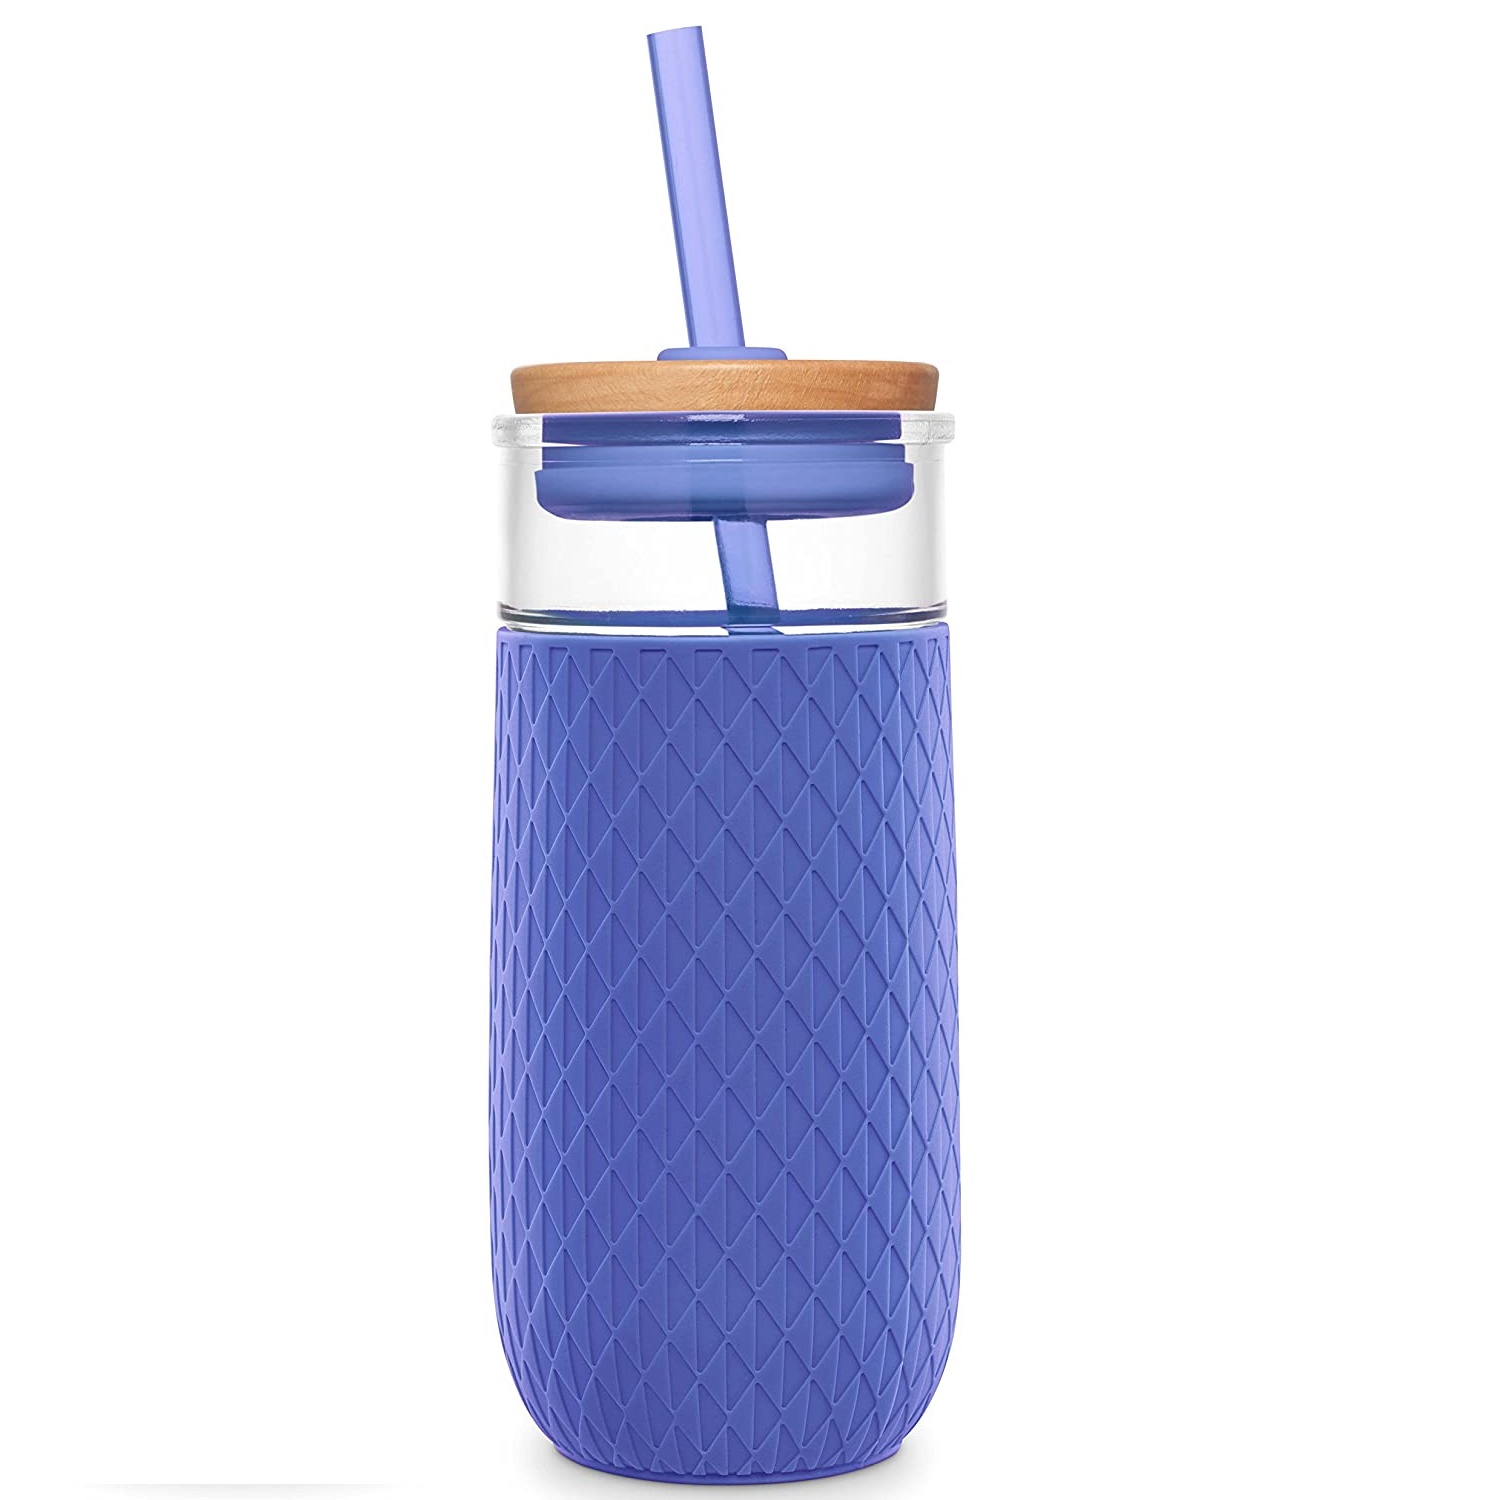 Discount Price 24 Oz Stainless Steel Tumbler - Wholesale 20oz Custom Colored Drinking Glass Tumbler with Silicone Sleeve and Bamboo Lid – SUNSUM